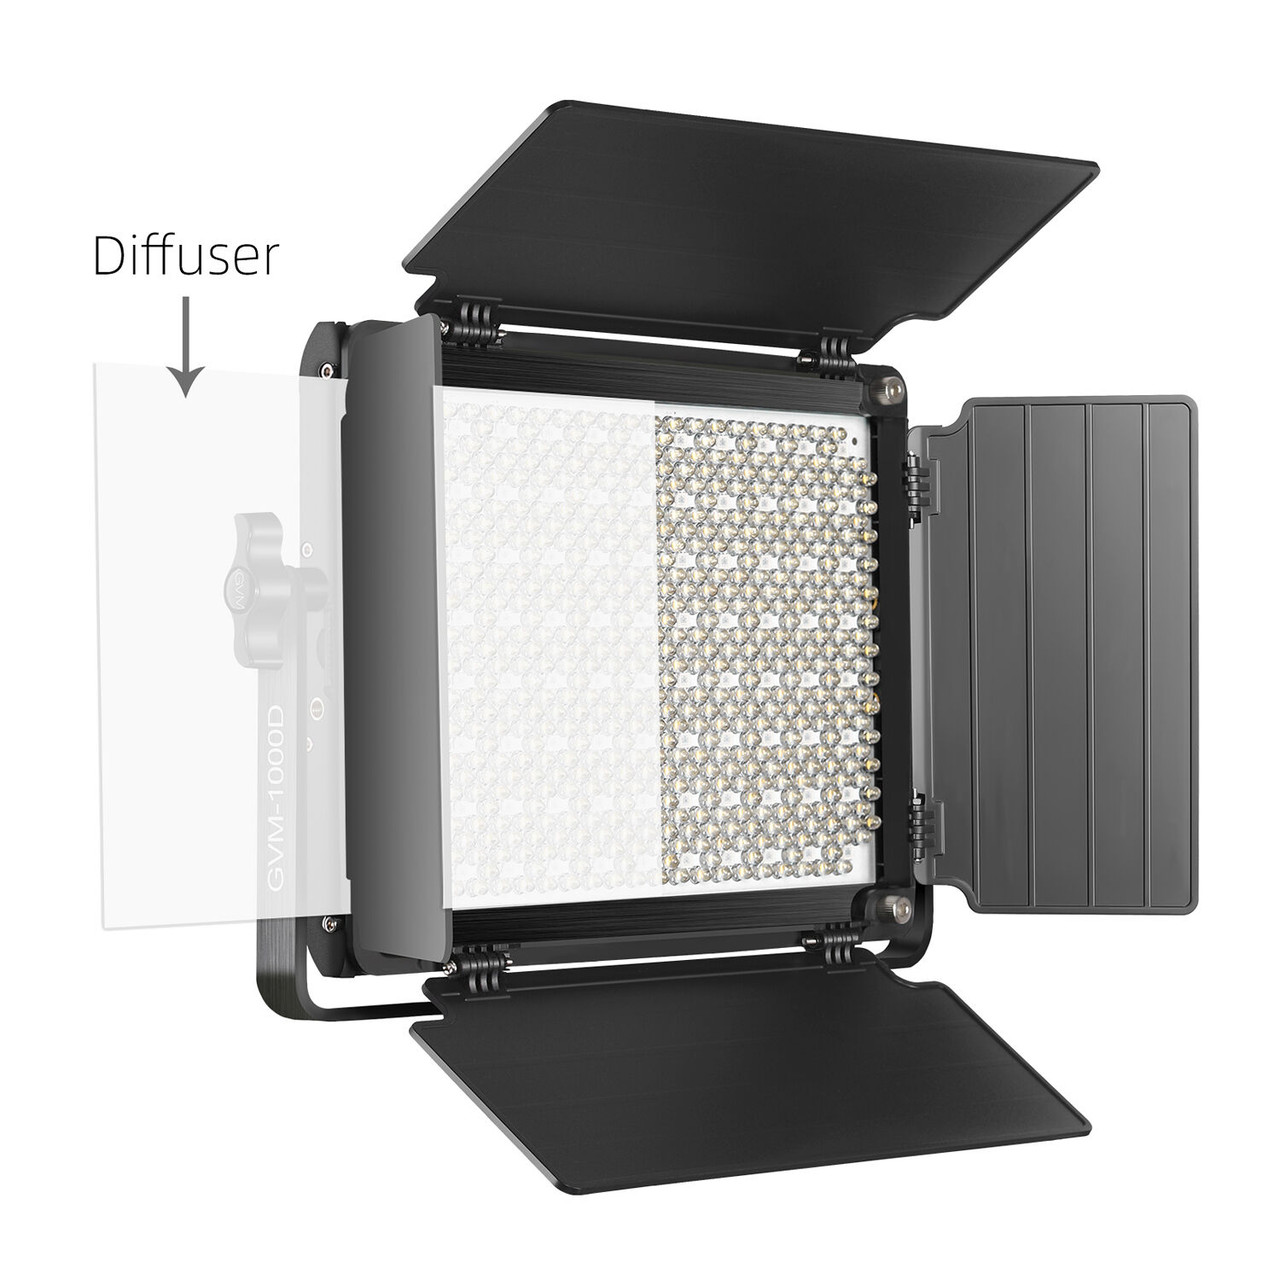  GVM 3 Pack LED Video Lighting Kits with APP Control